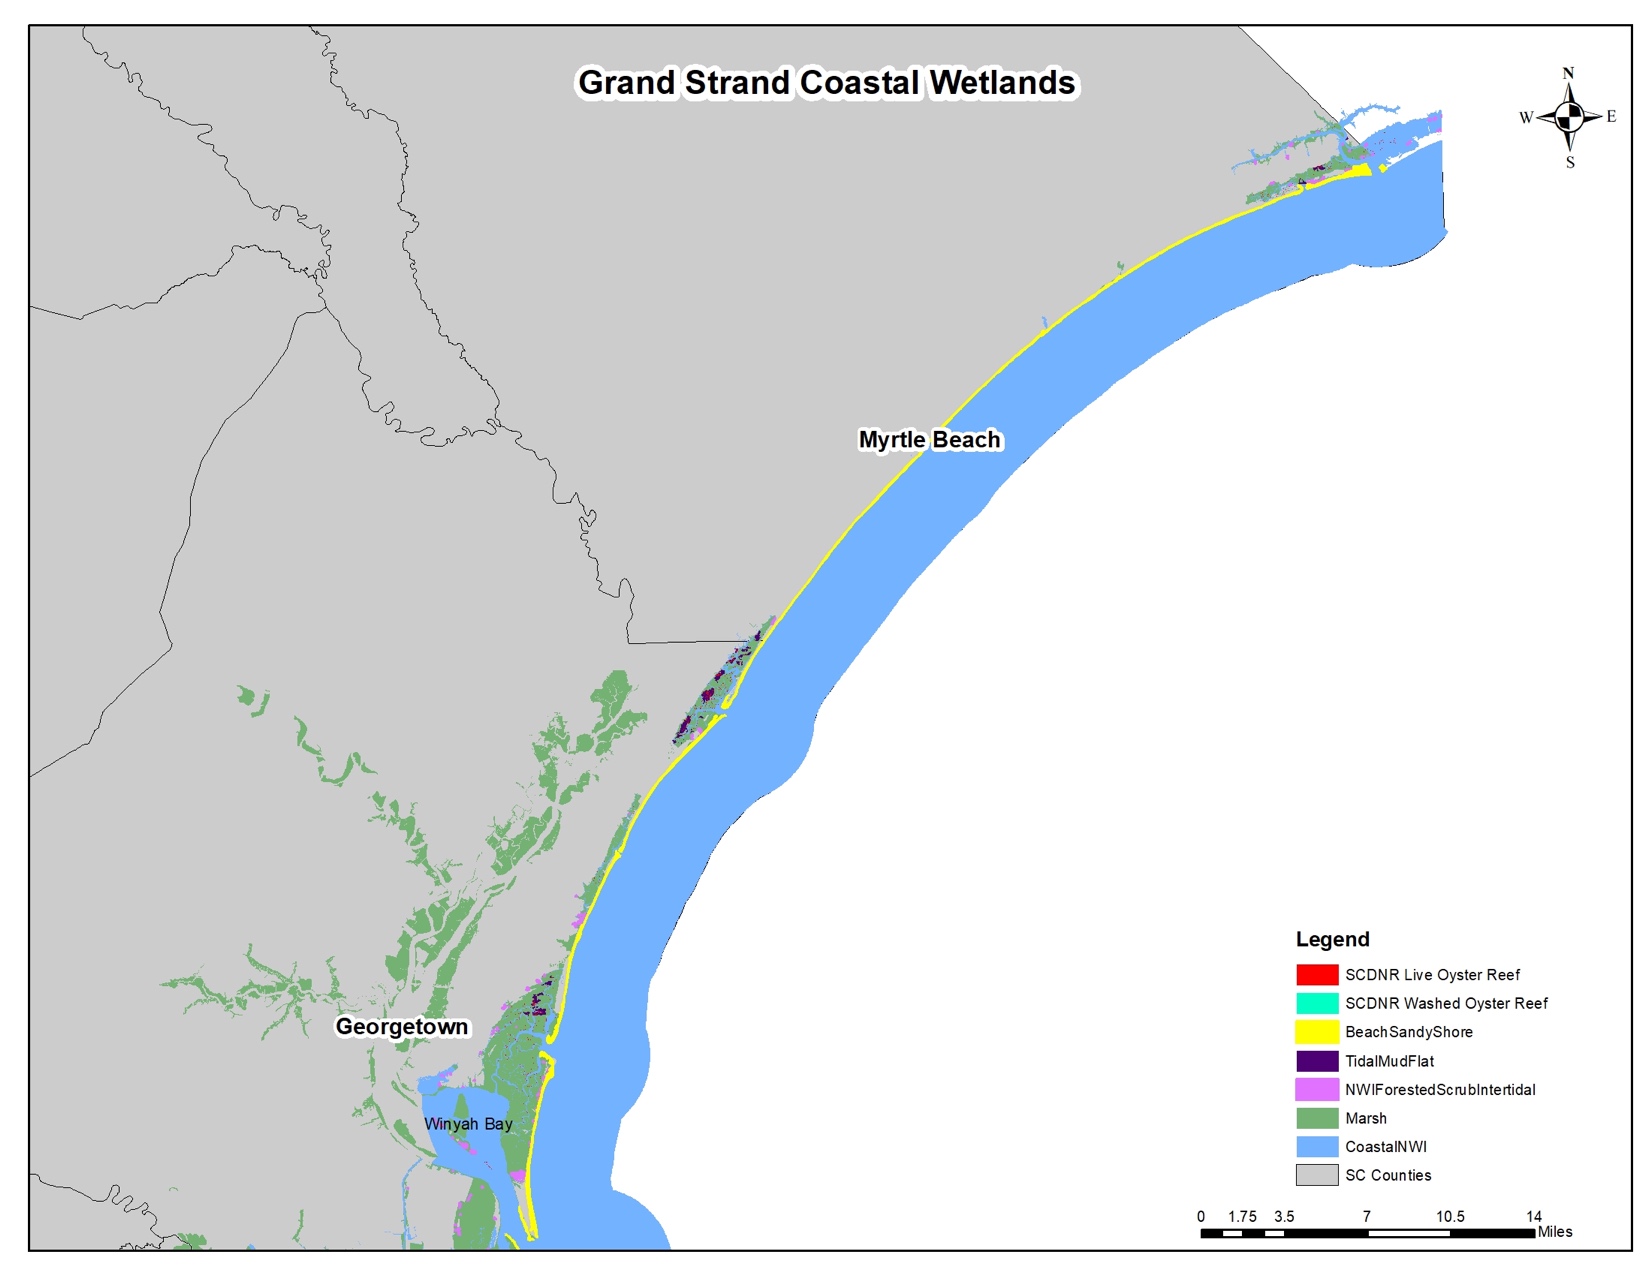 map of the Grand Strand Area that extends from upper Horry County near Little River to the southern edge of Georgetown County, terminating at Winyah Bay.